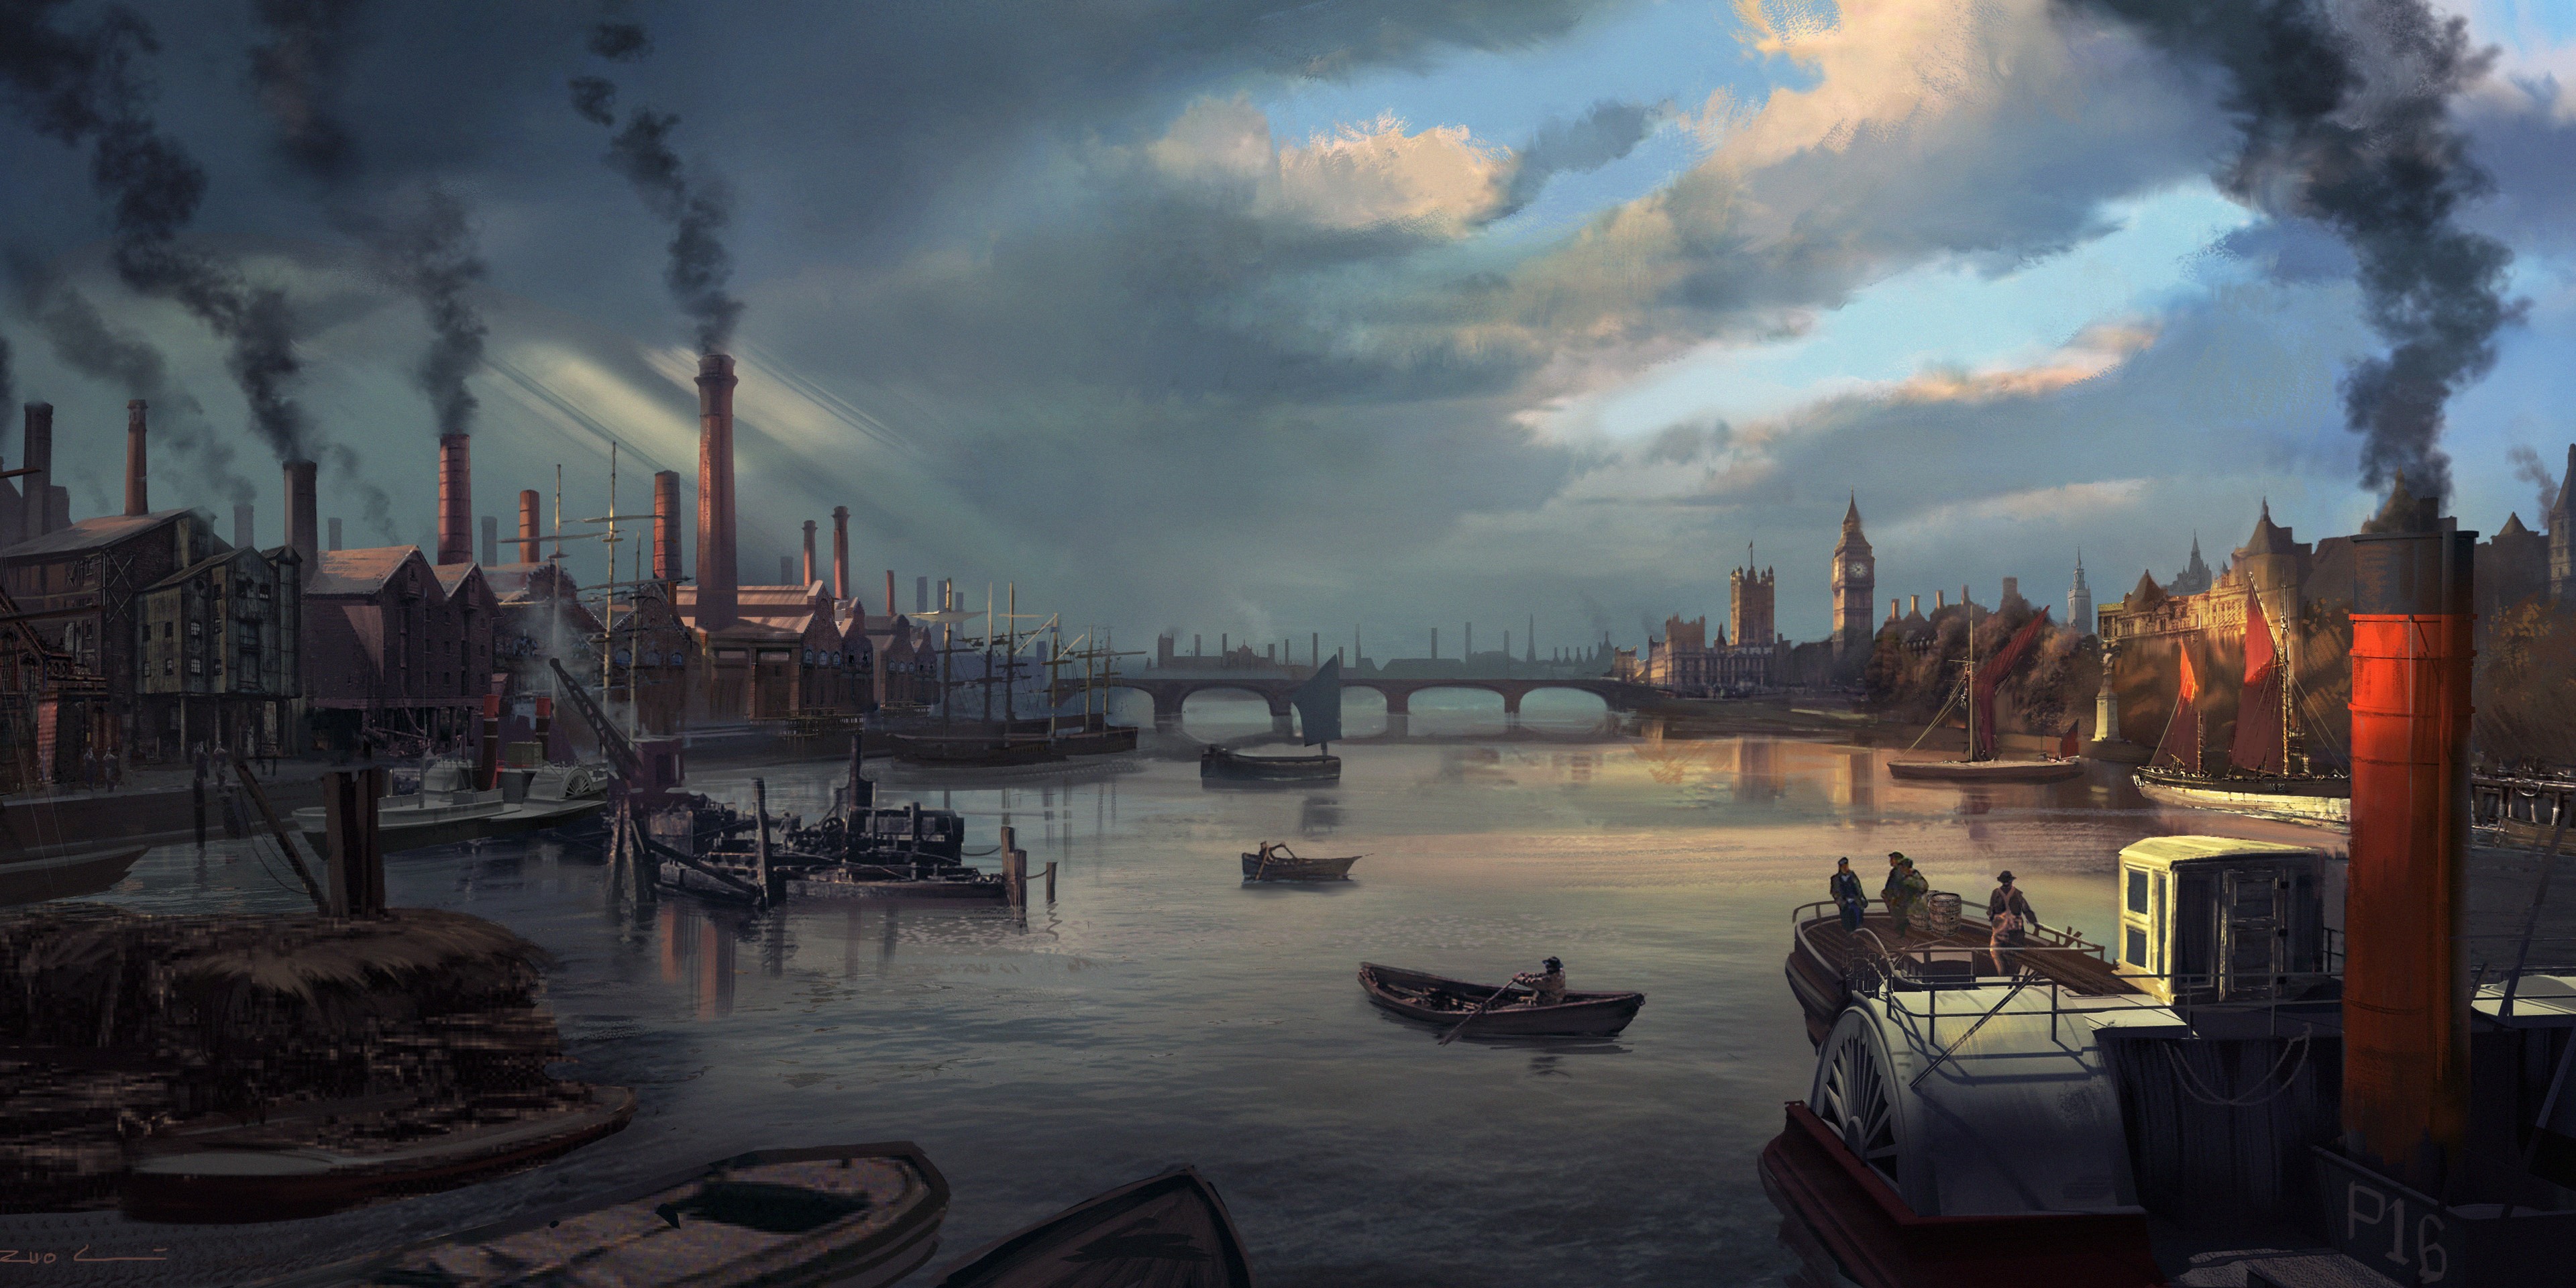 Download mobile wallpaper Assassin's Creed: Syndicate, Assassin's Creed, Video Game for free.